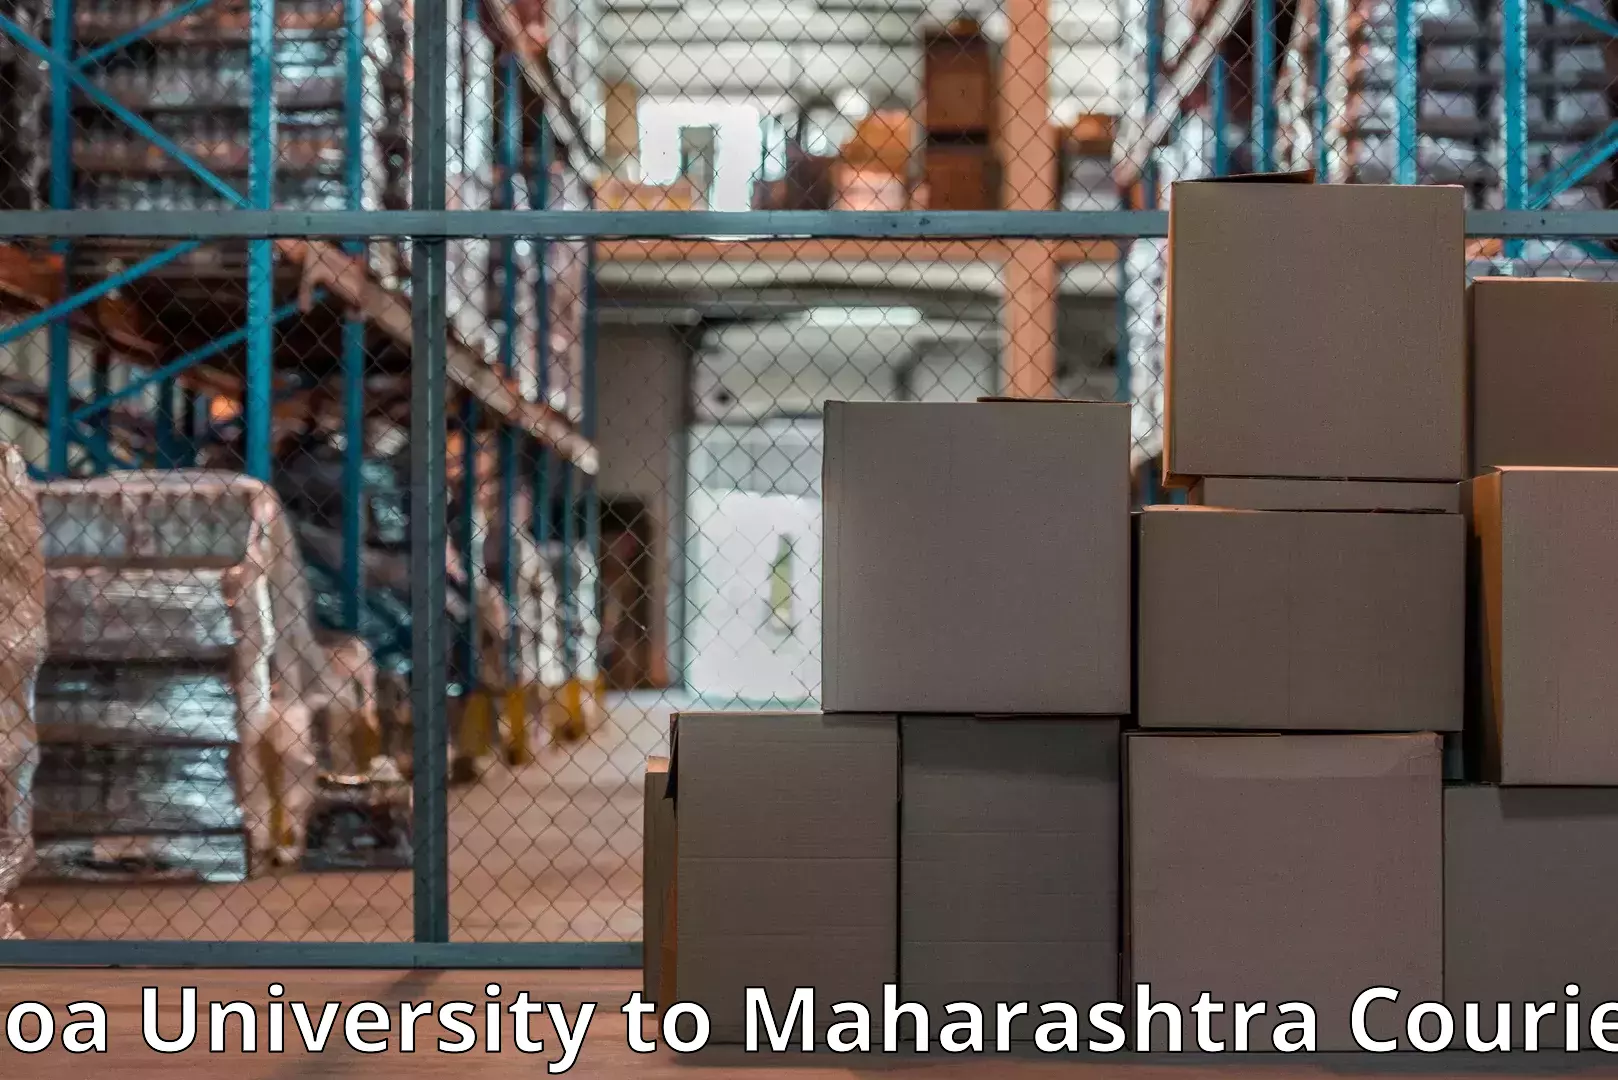 Furniture moving experts Goa University to Nanded